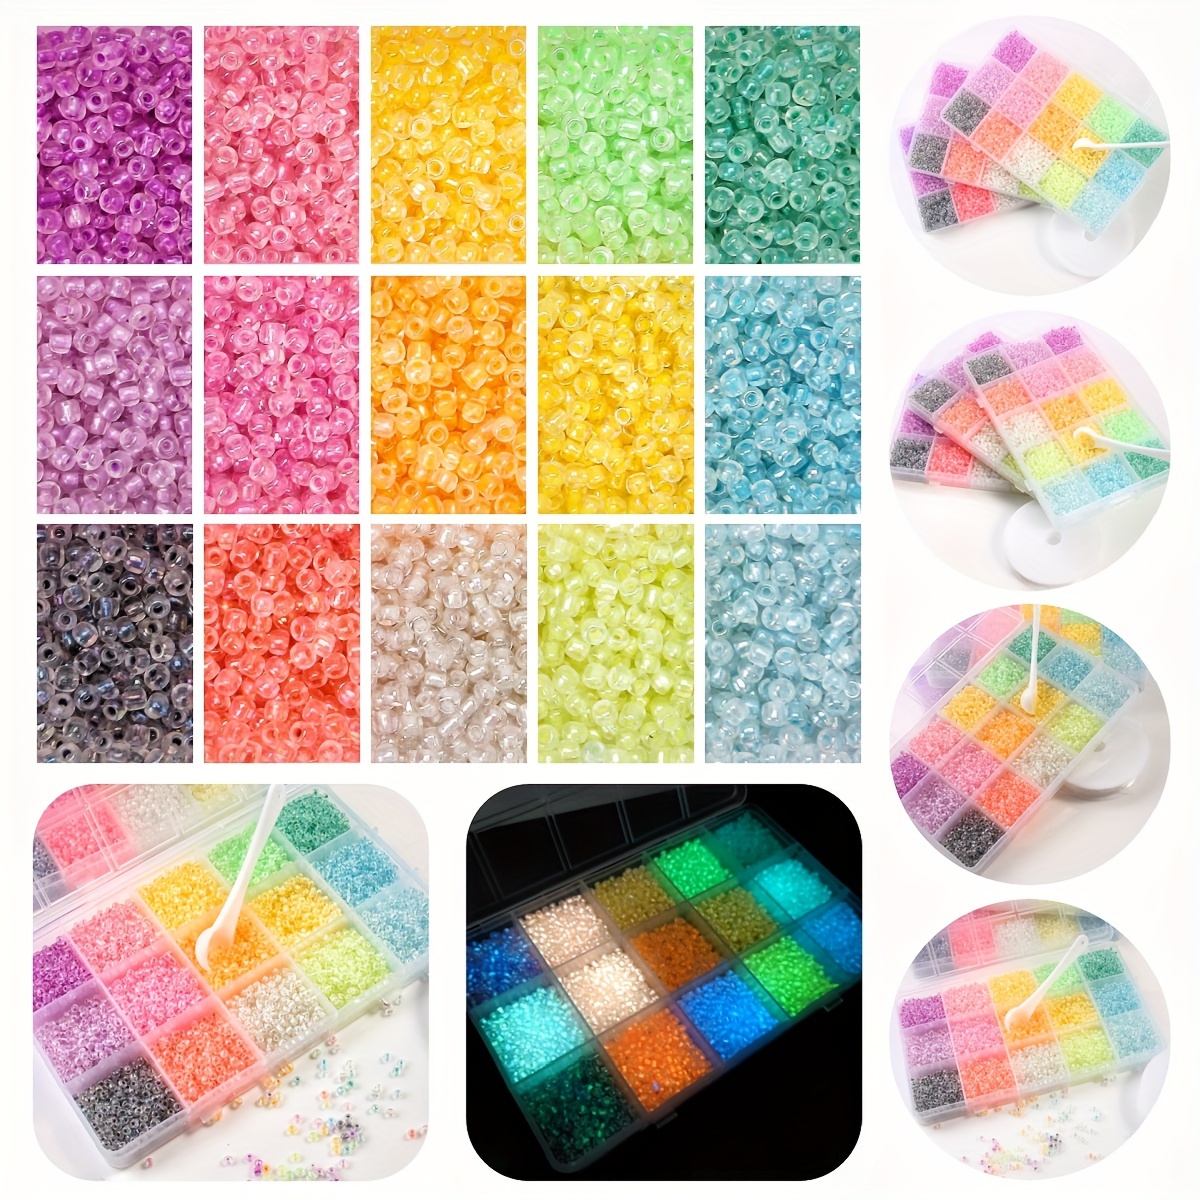 

5600pcs 3mm Luminous Seed Beads With Thread & Spoon, Assorted Colors, Diy Craft Kit For Bracelet, Ring, Earrings, Handmade Jewelry Making